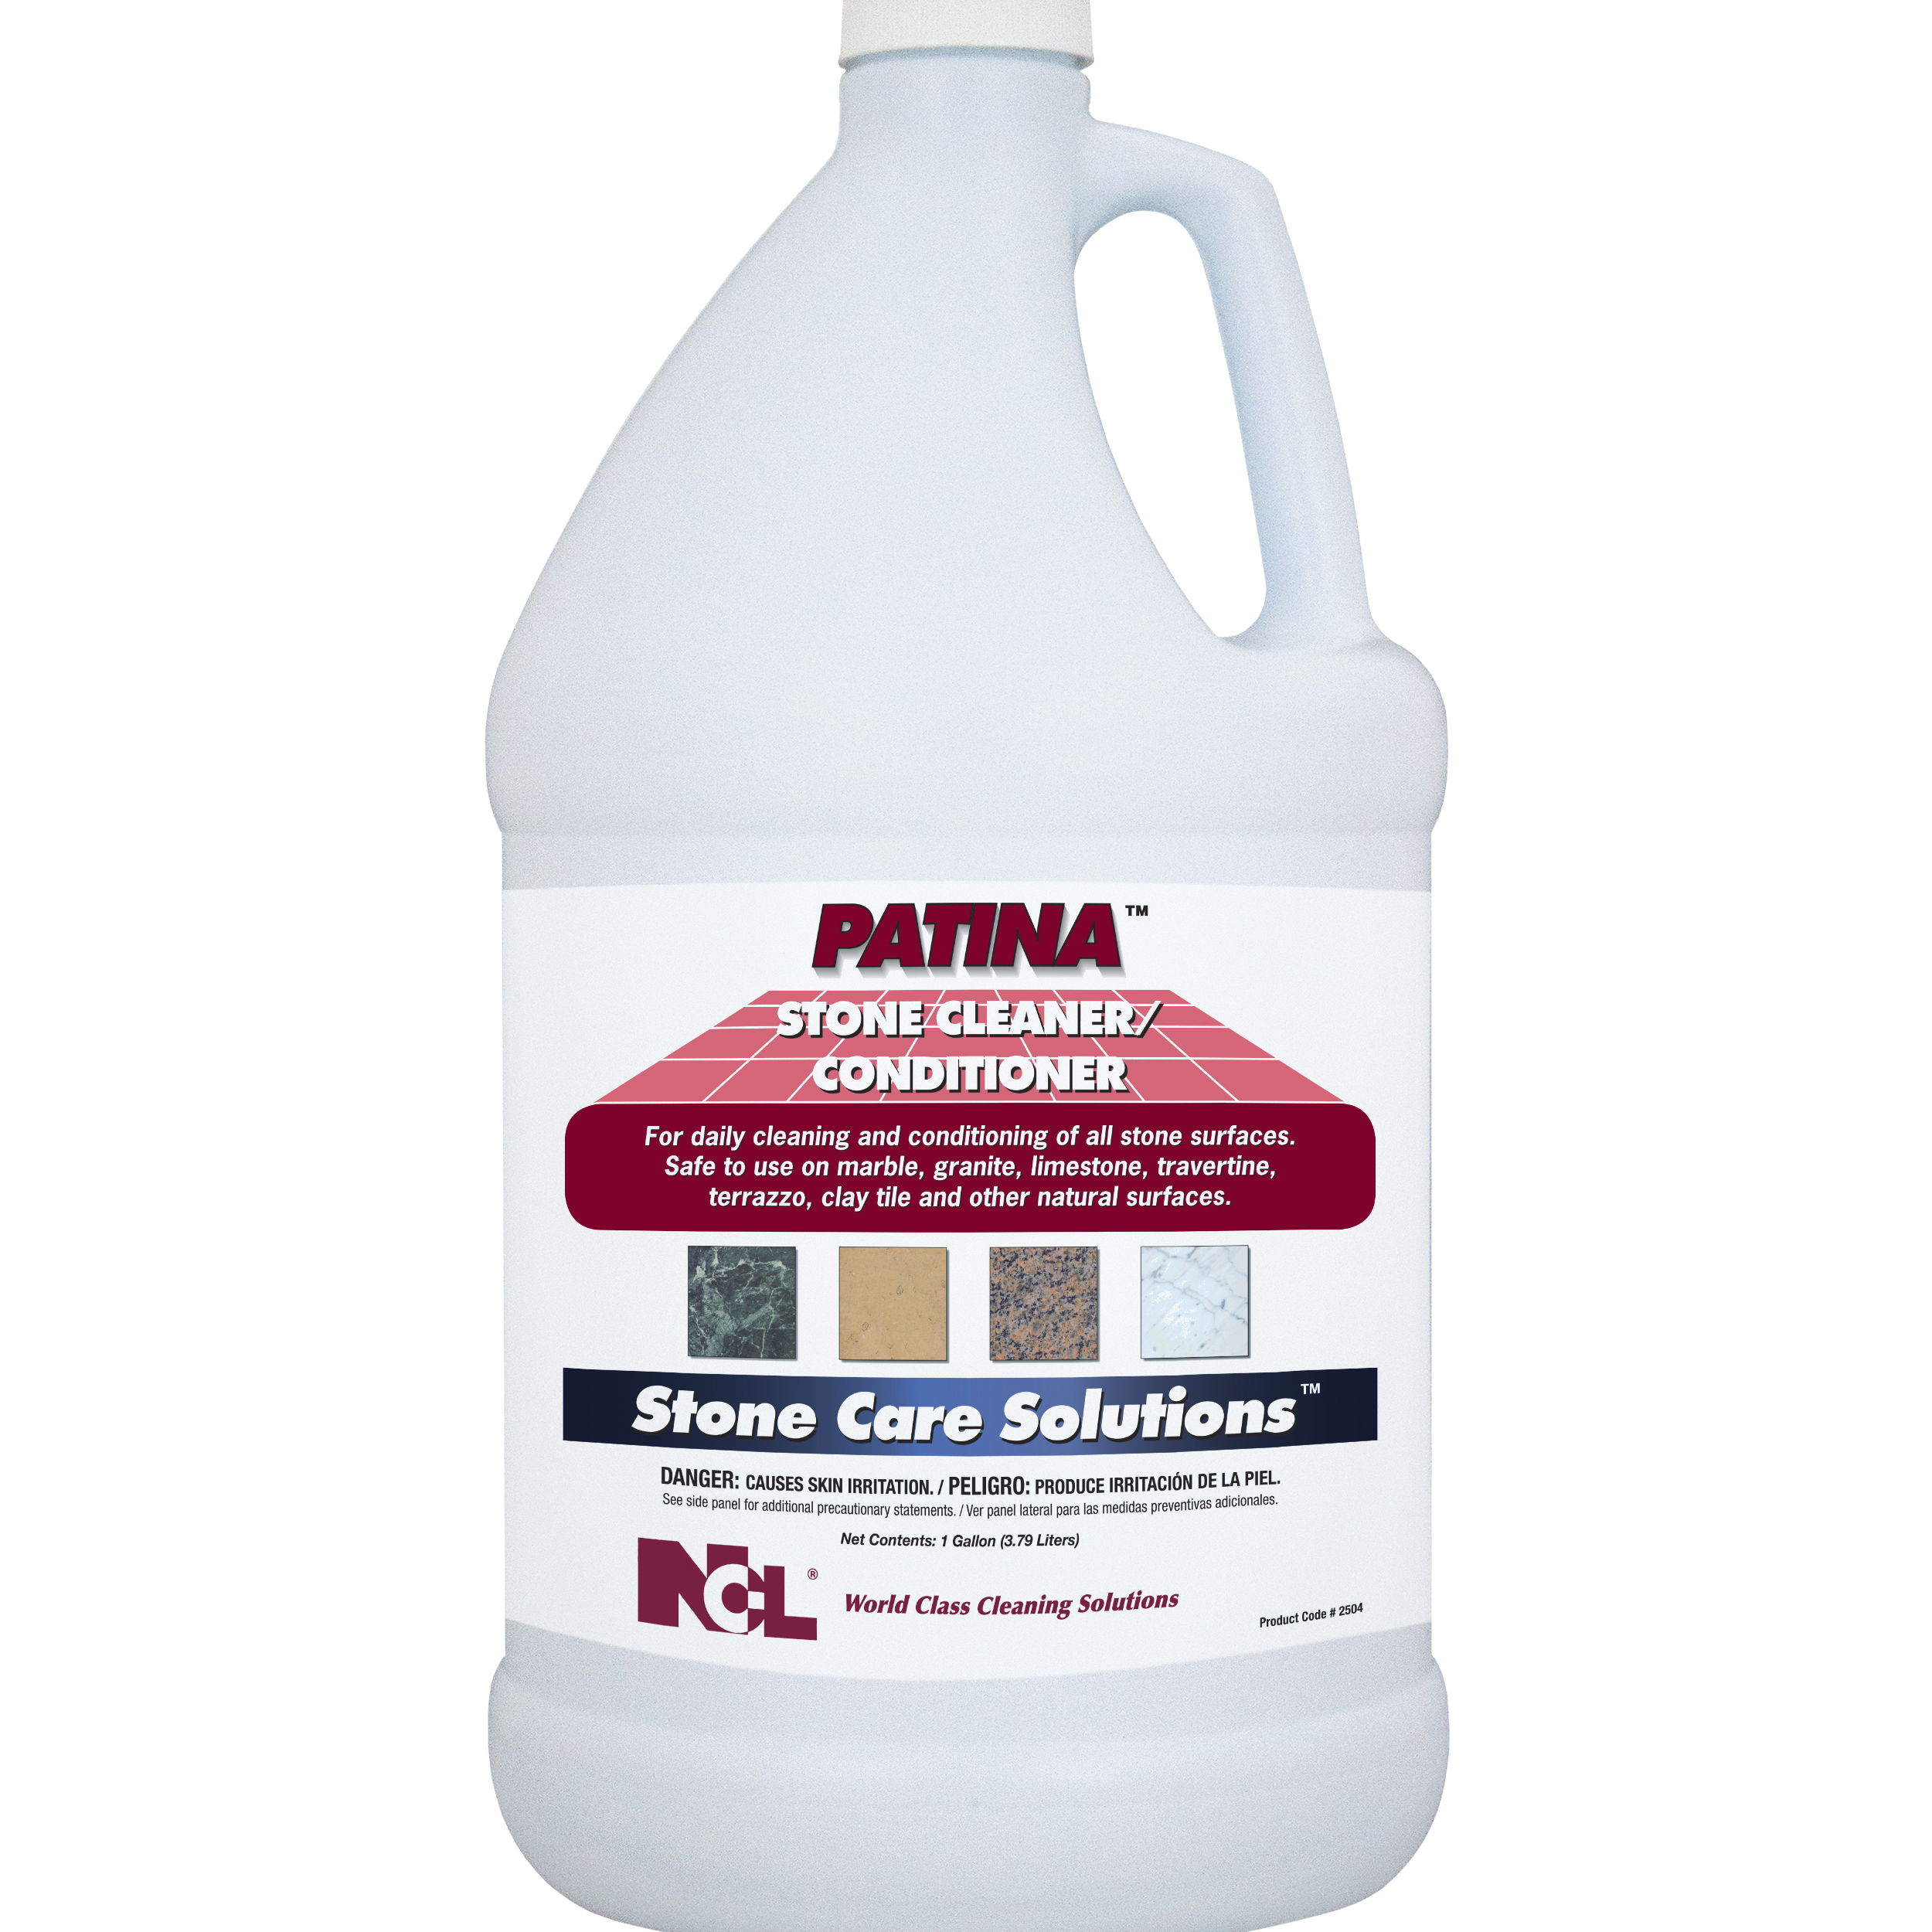  PATINA  Stone Cleaner / Conditioner 4/1 Gal. Case (NCL2504-29) 